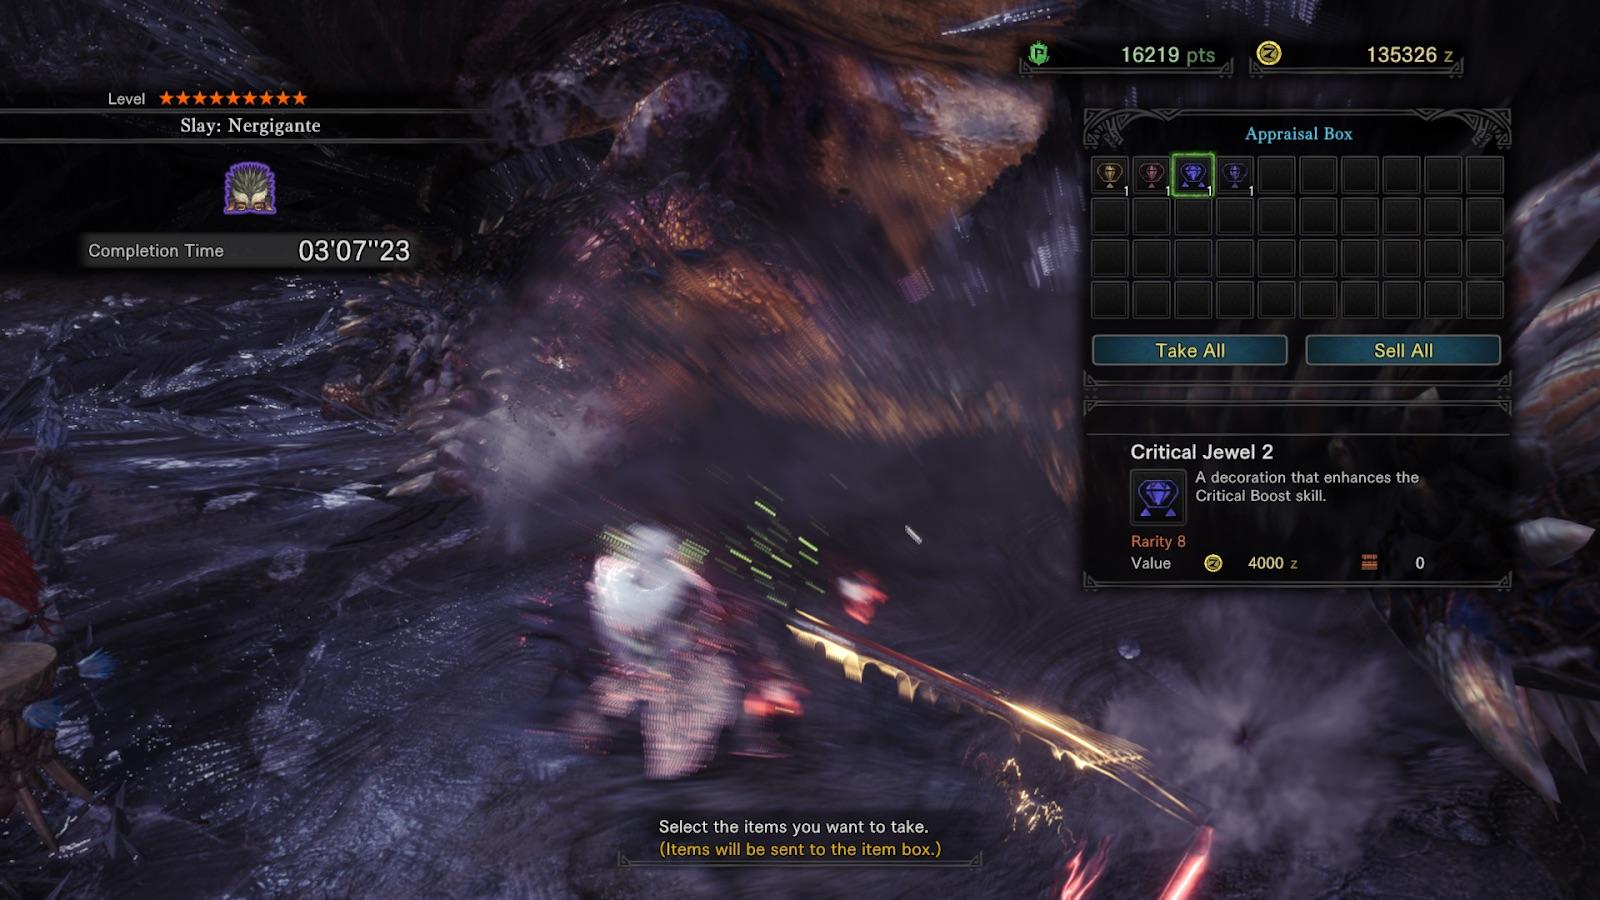 Is crit boost good MHW?